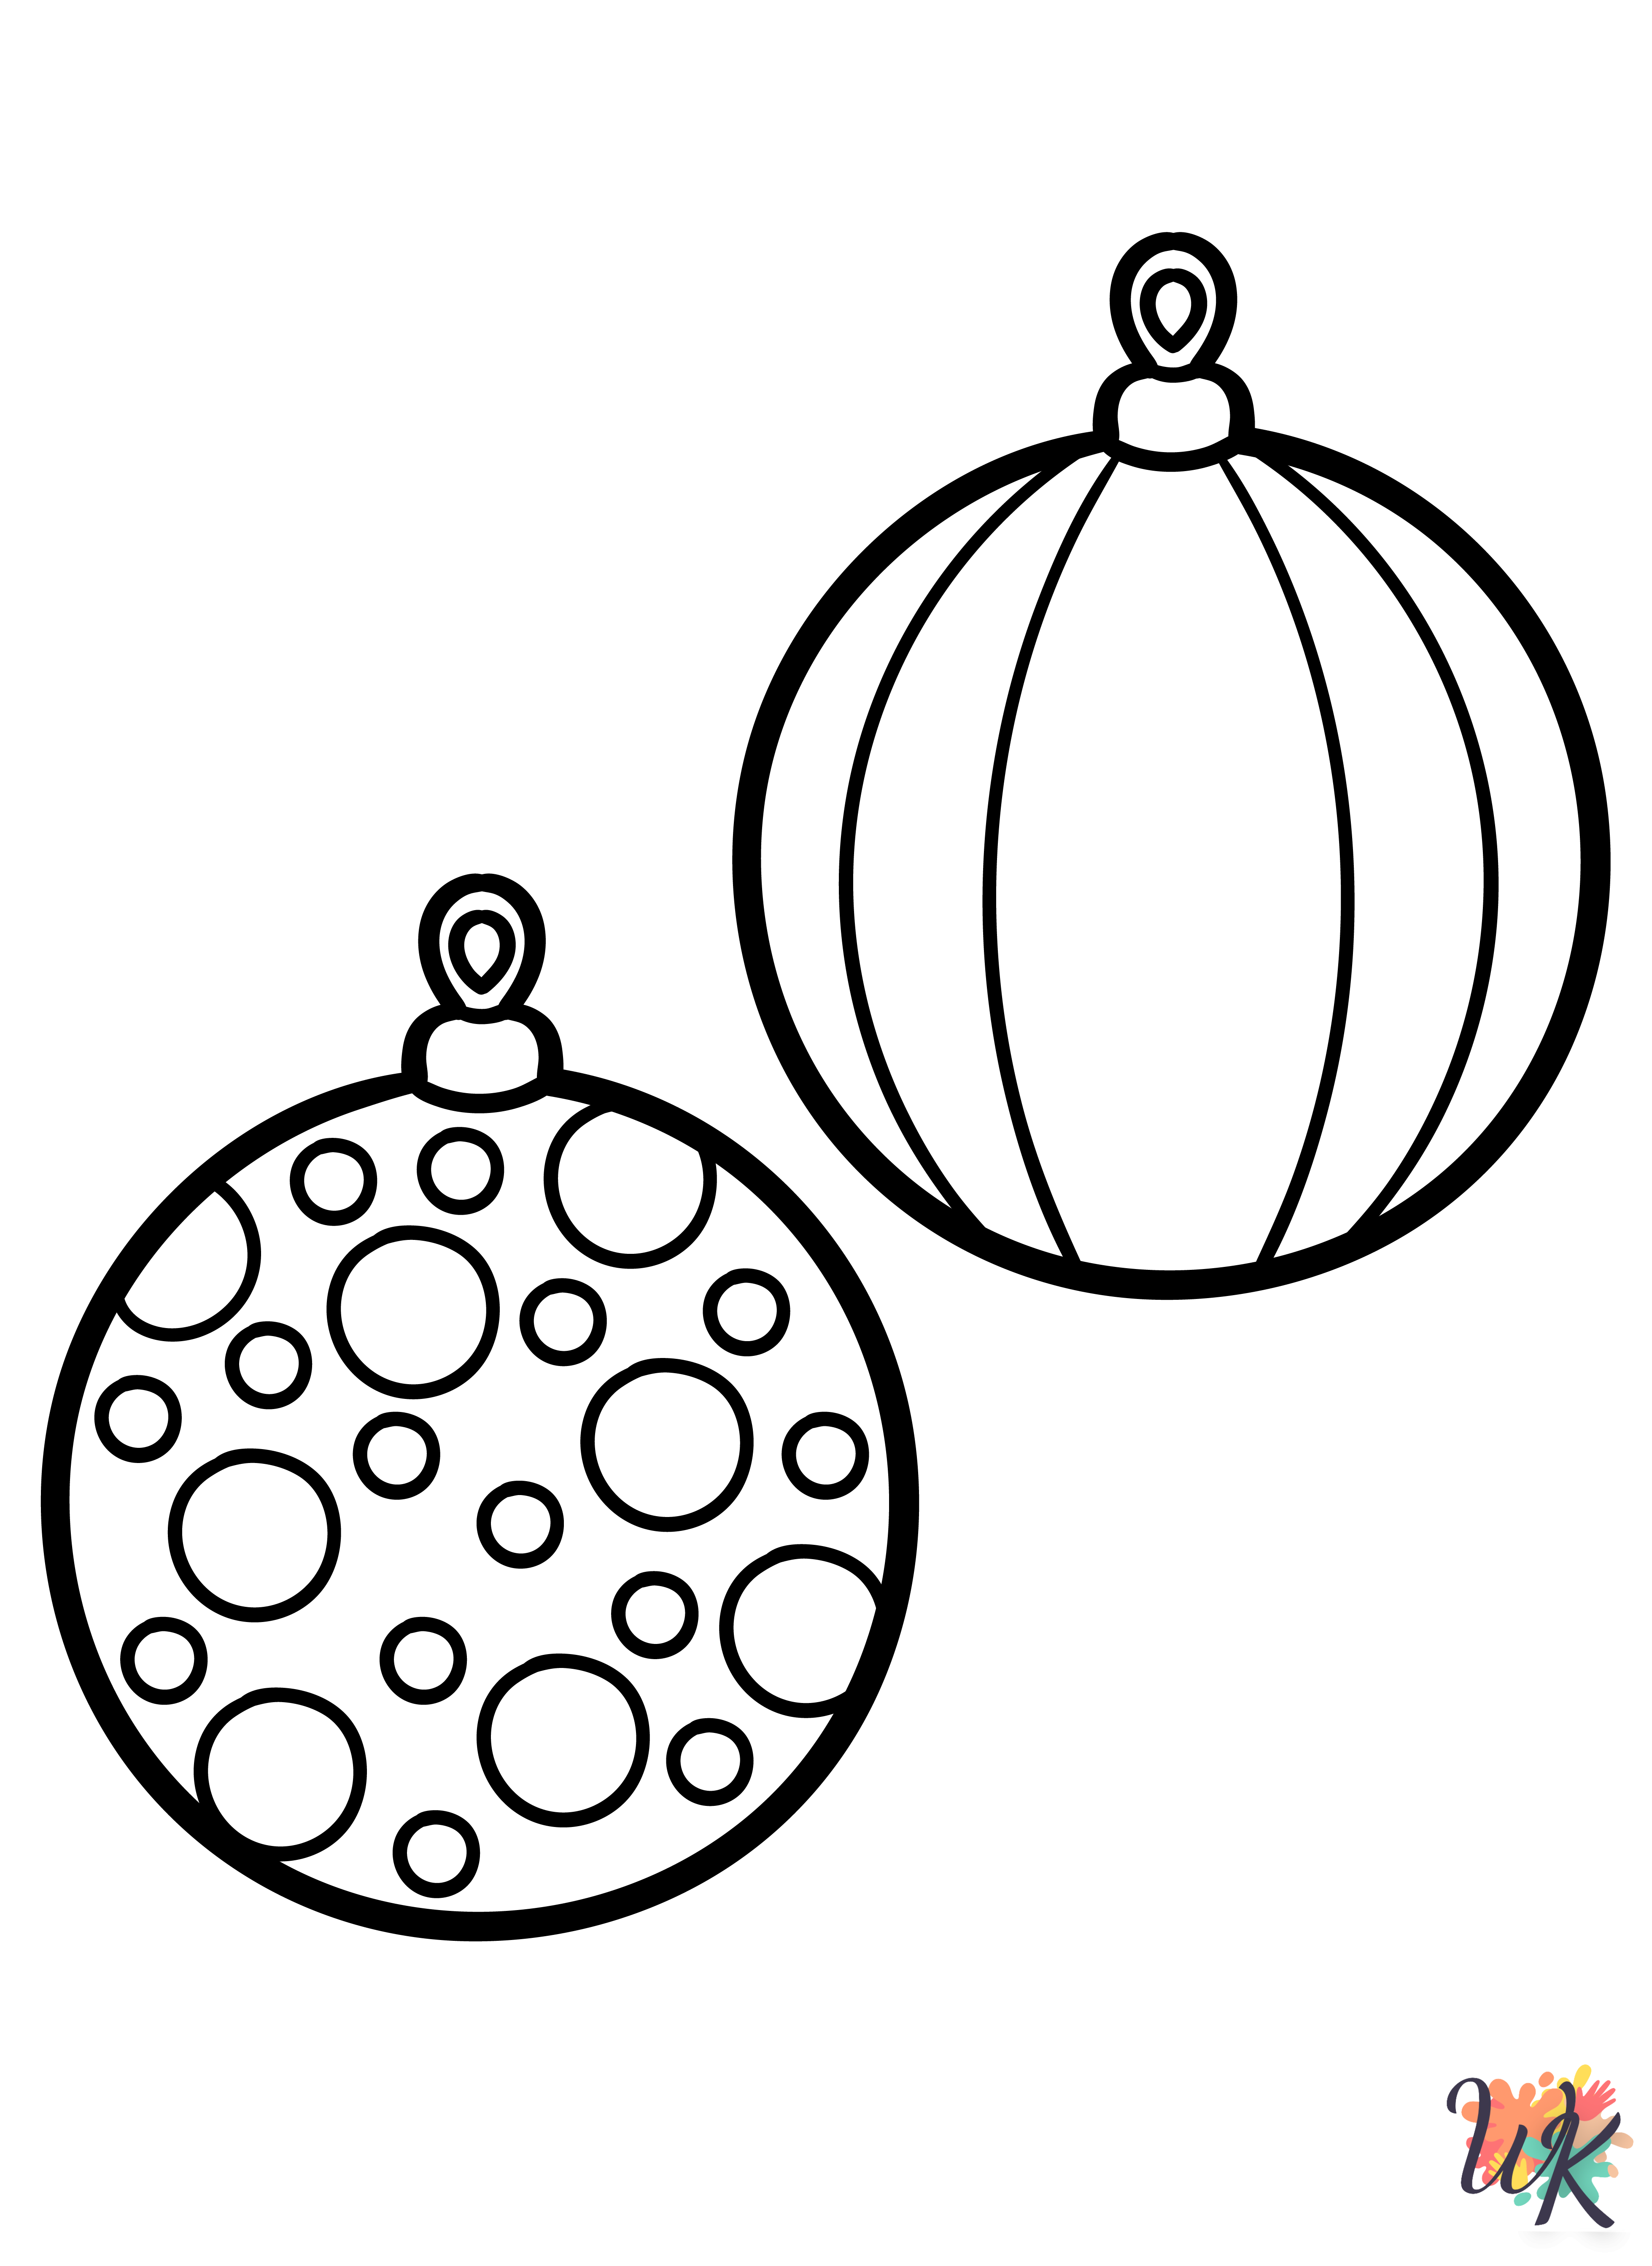 Christmas Ornament coloring pages for kids